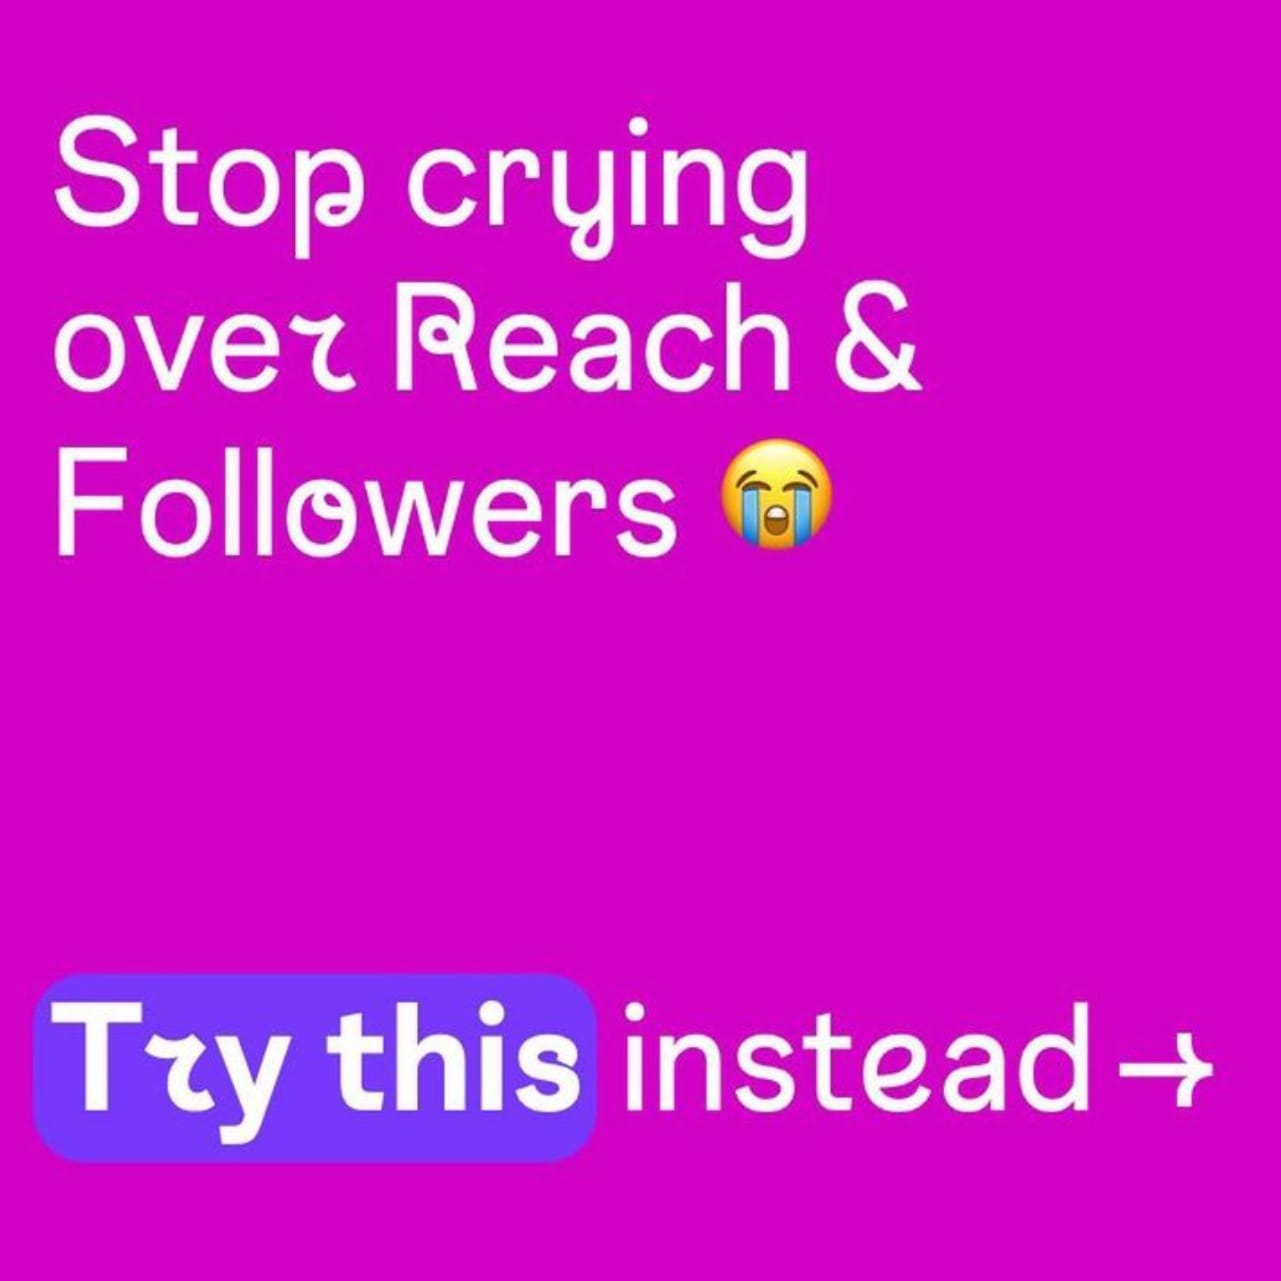 Screengrab from an Instagram post from Instagram that reads 'Stop crying over Reach & Followers *crying emoji* Try this instead'.